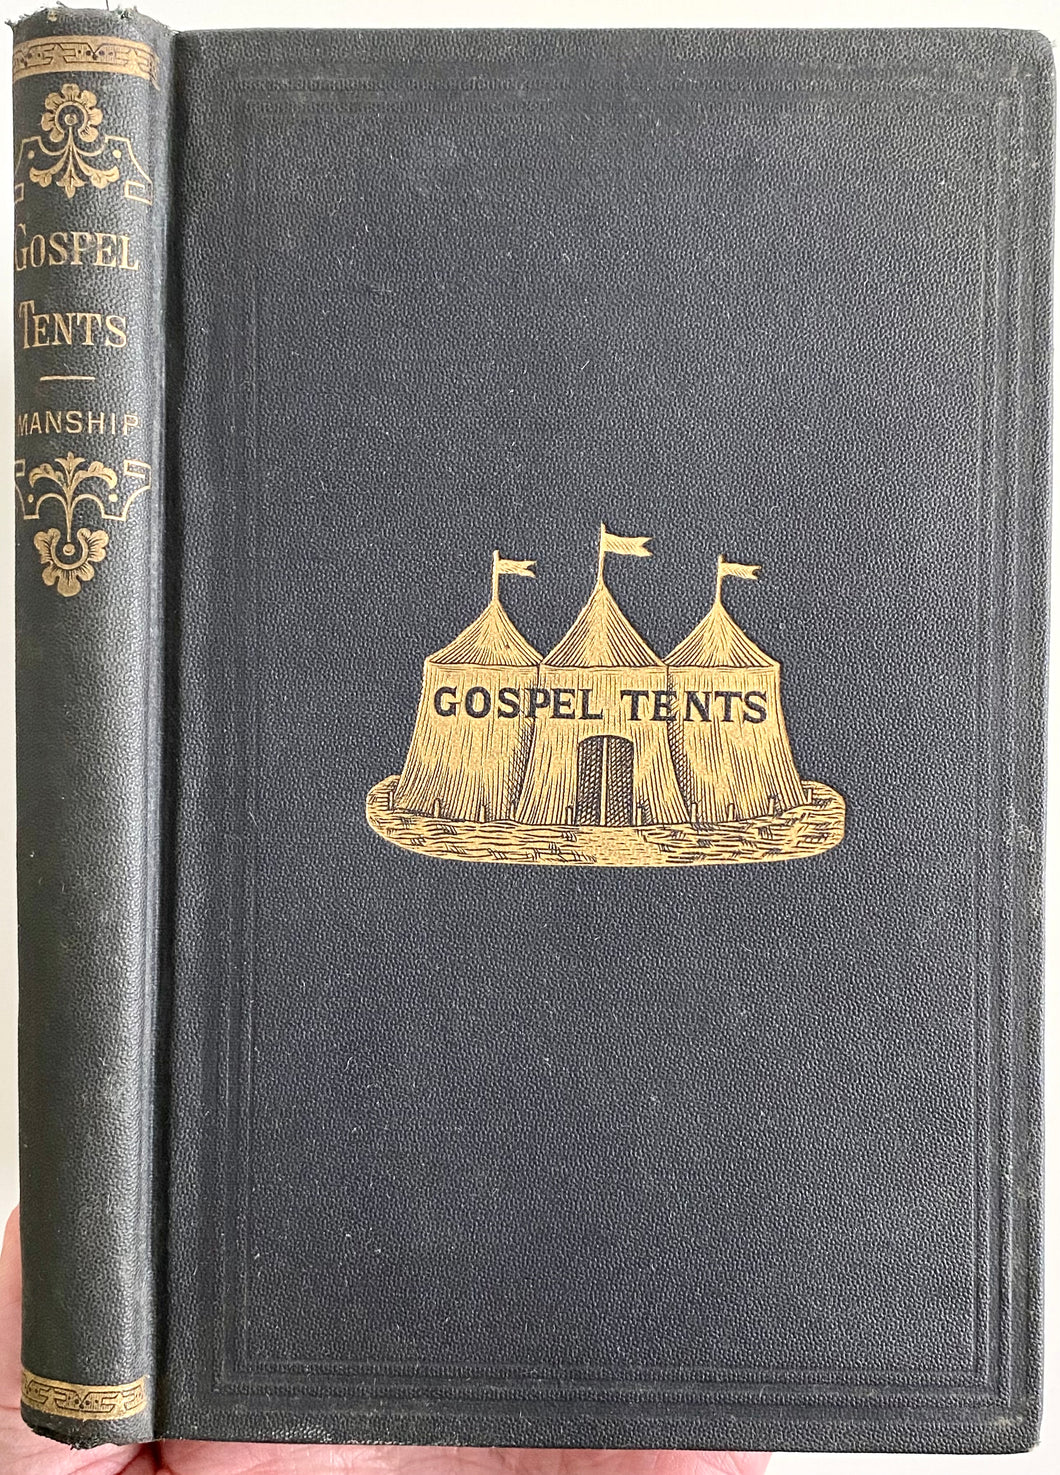 1884 ANDREW MANSHIP. History of Gospel Tents, Camp Meetings, and Outdoor Revivals.